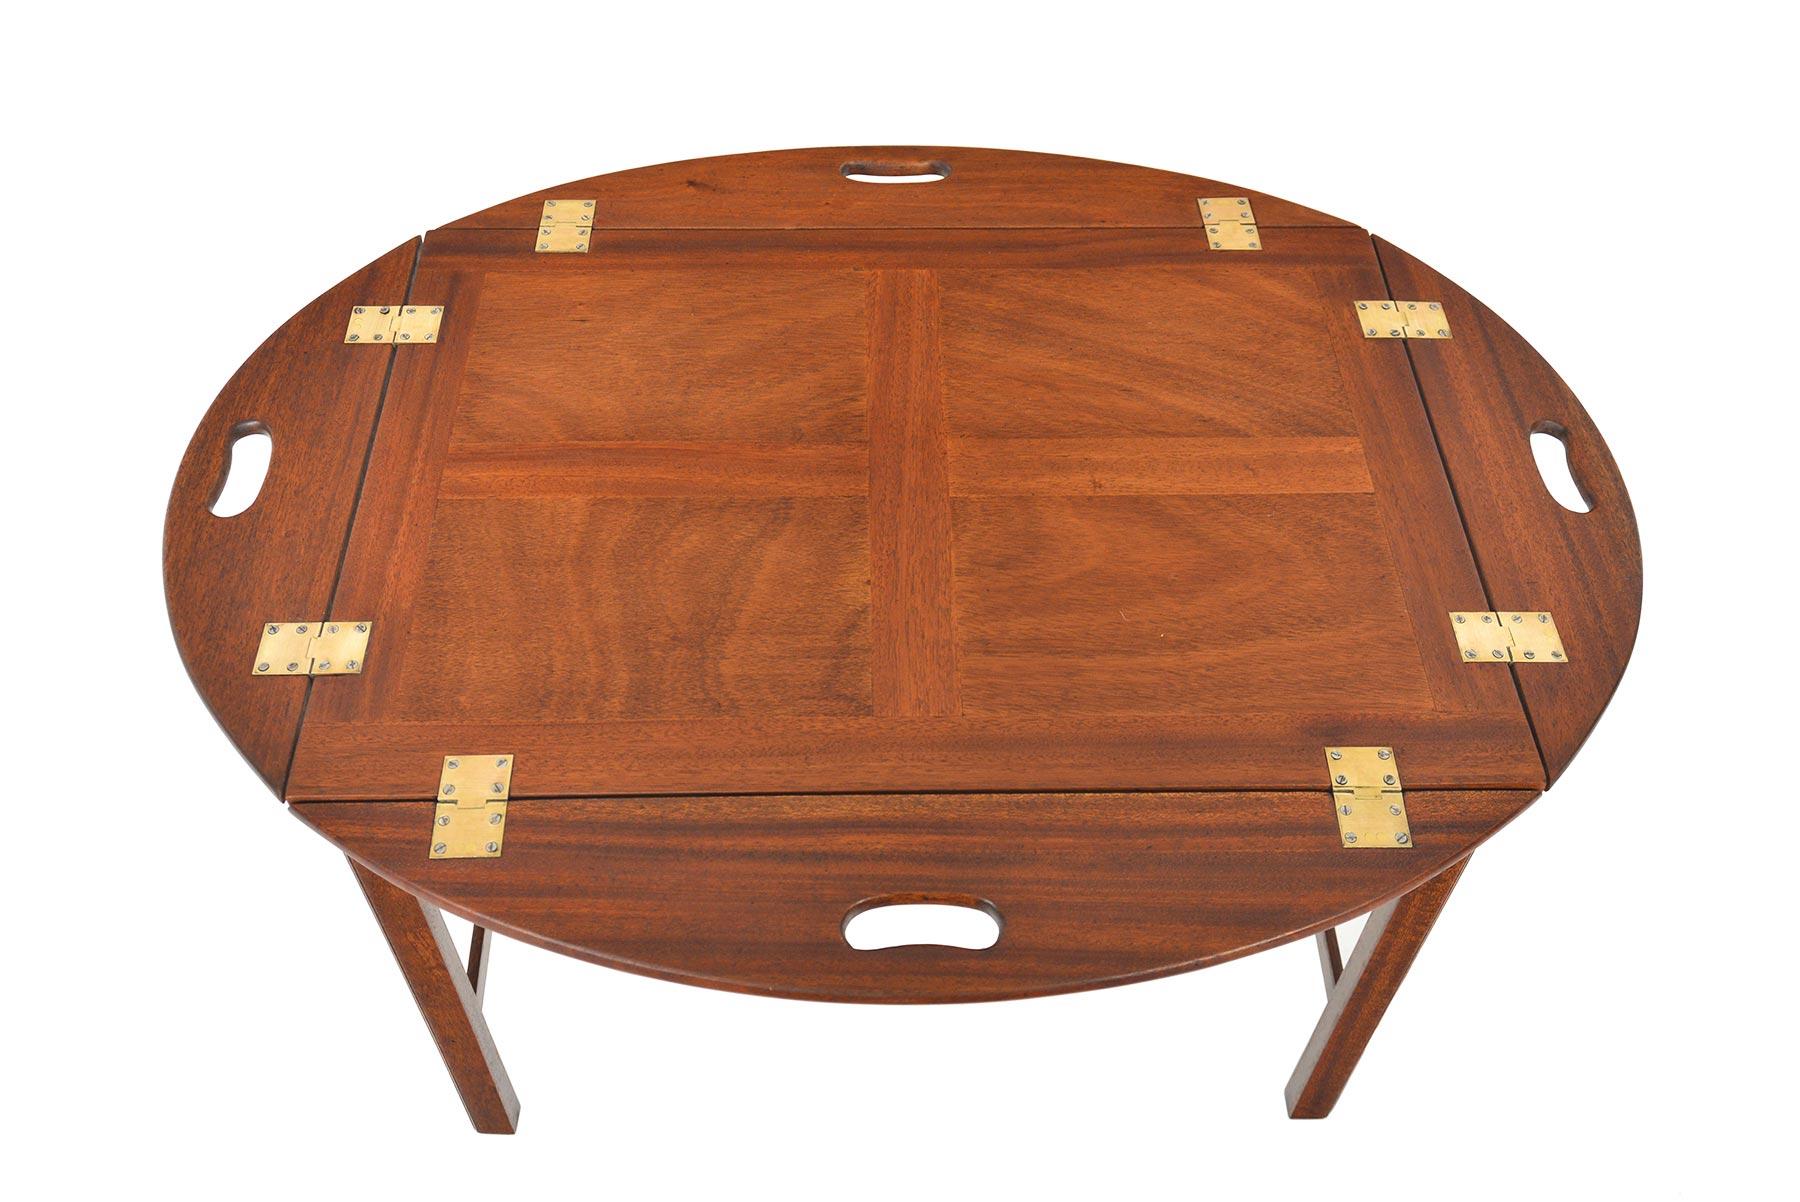 This elegant Danish modern butler’s coffee table is crafted in rich mahogany. The removable tabletop offers hinged sides for convenient travel. In excellent original condition.

   